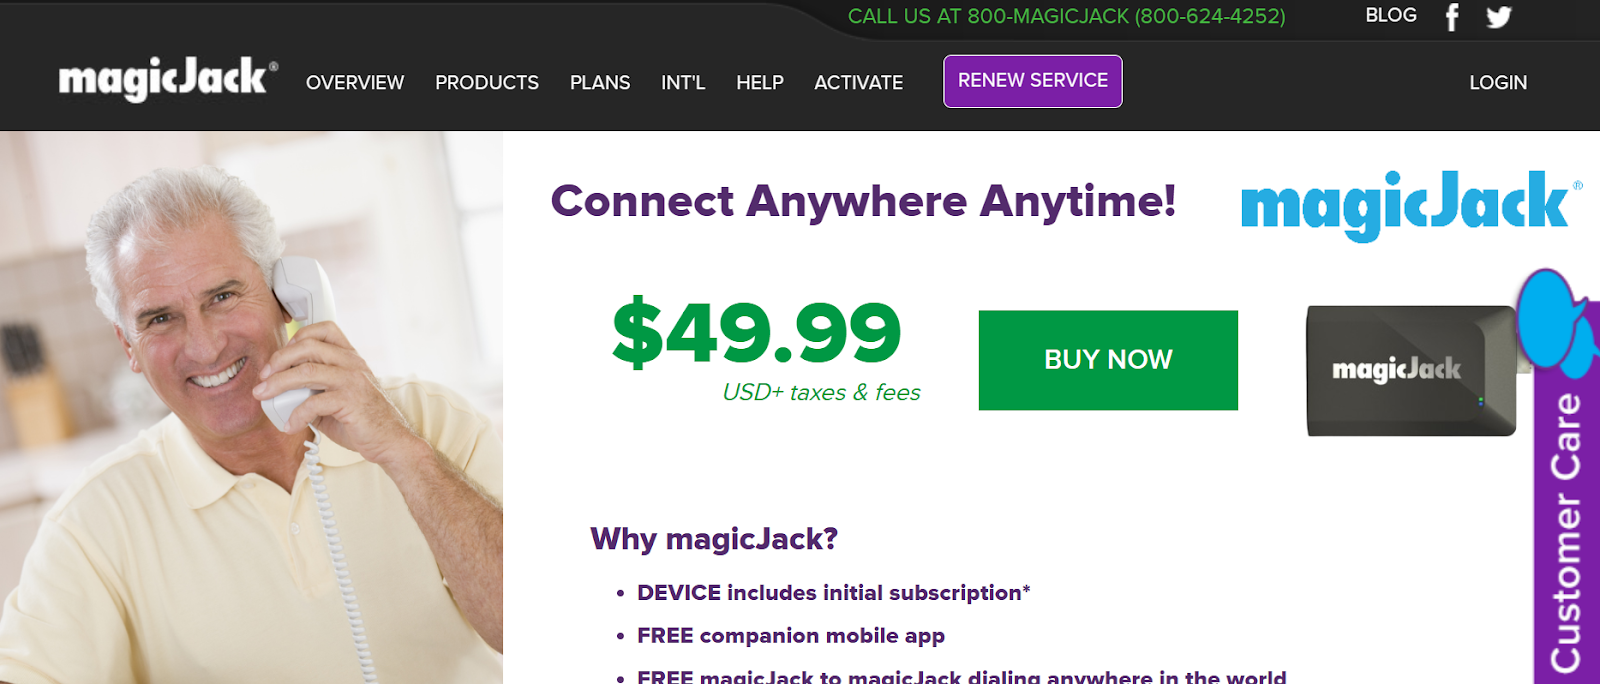 magicJack website snapshot highlighting the services it offers.